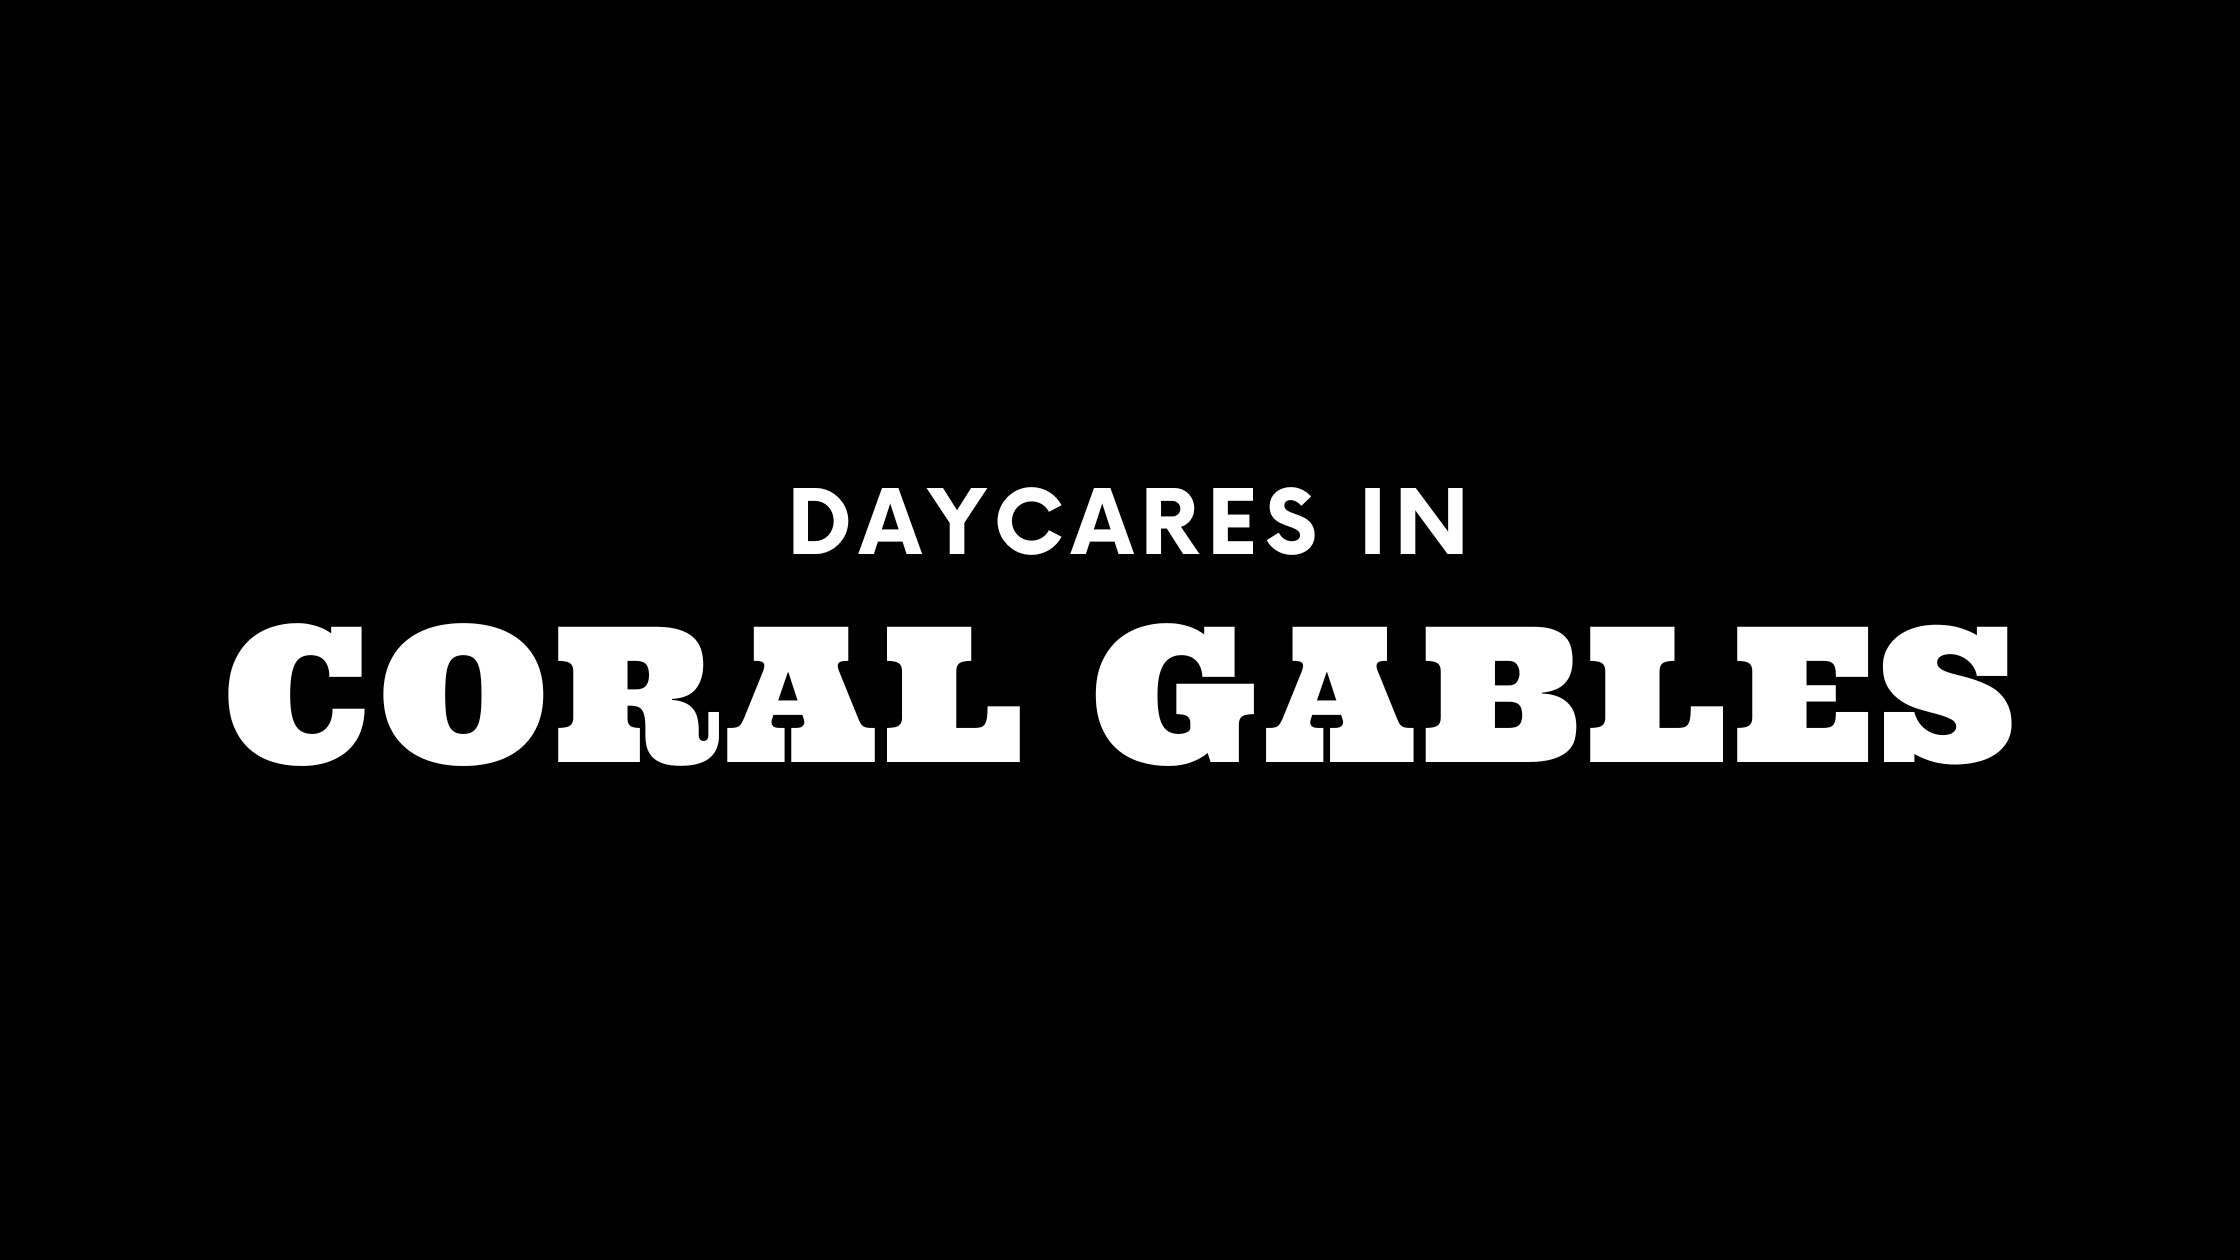 Daycares in Coral Gables